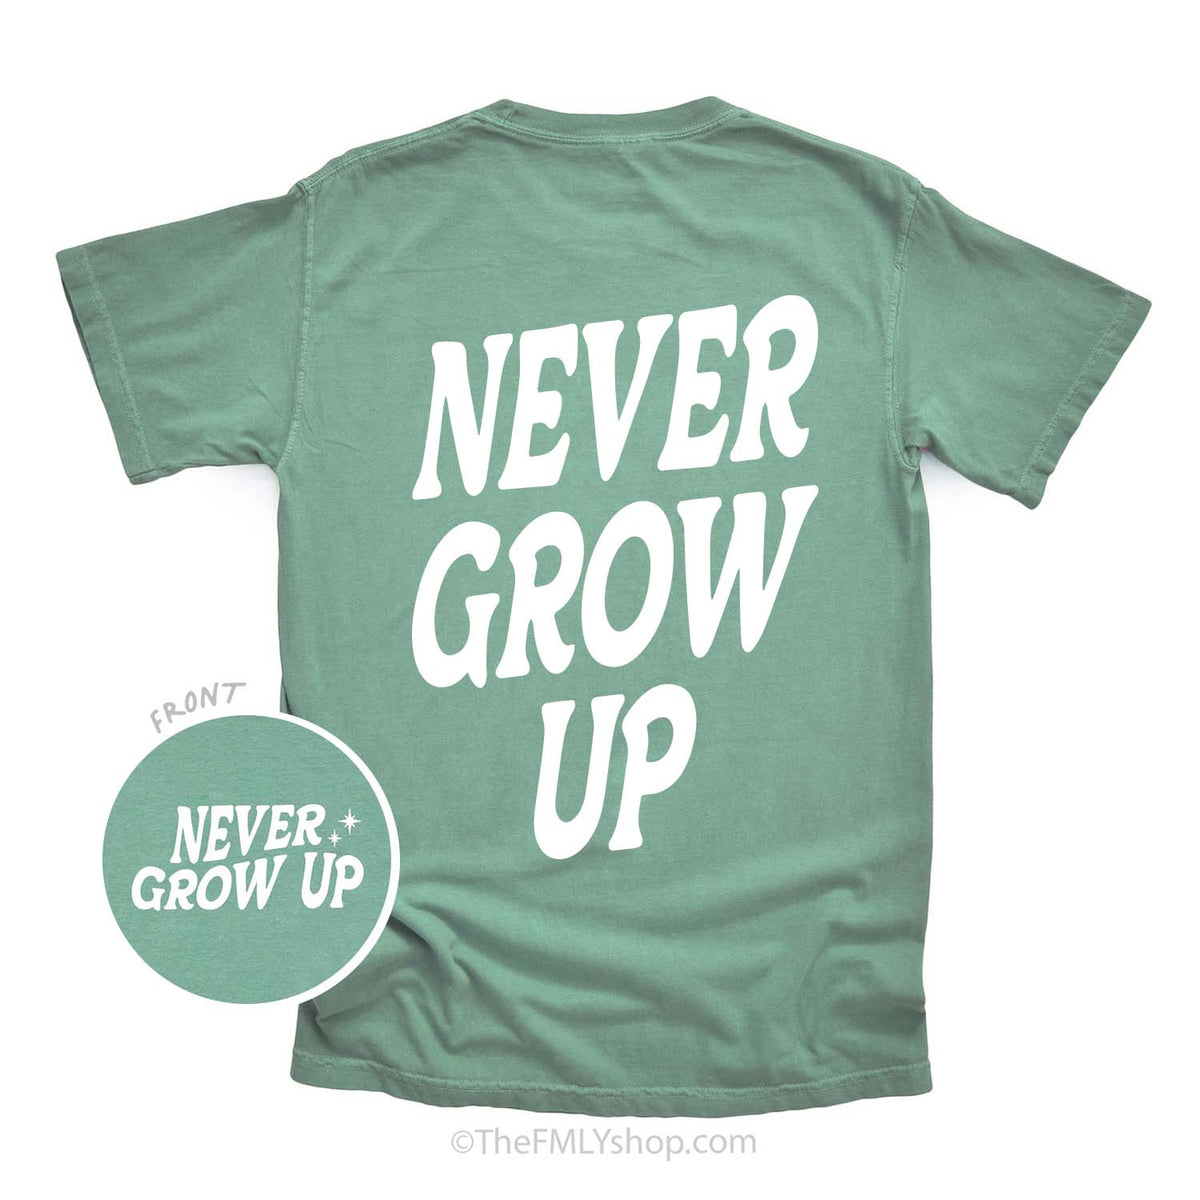 Green t-shirt with "Never Grow Up" back print